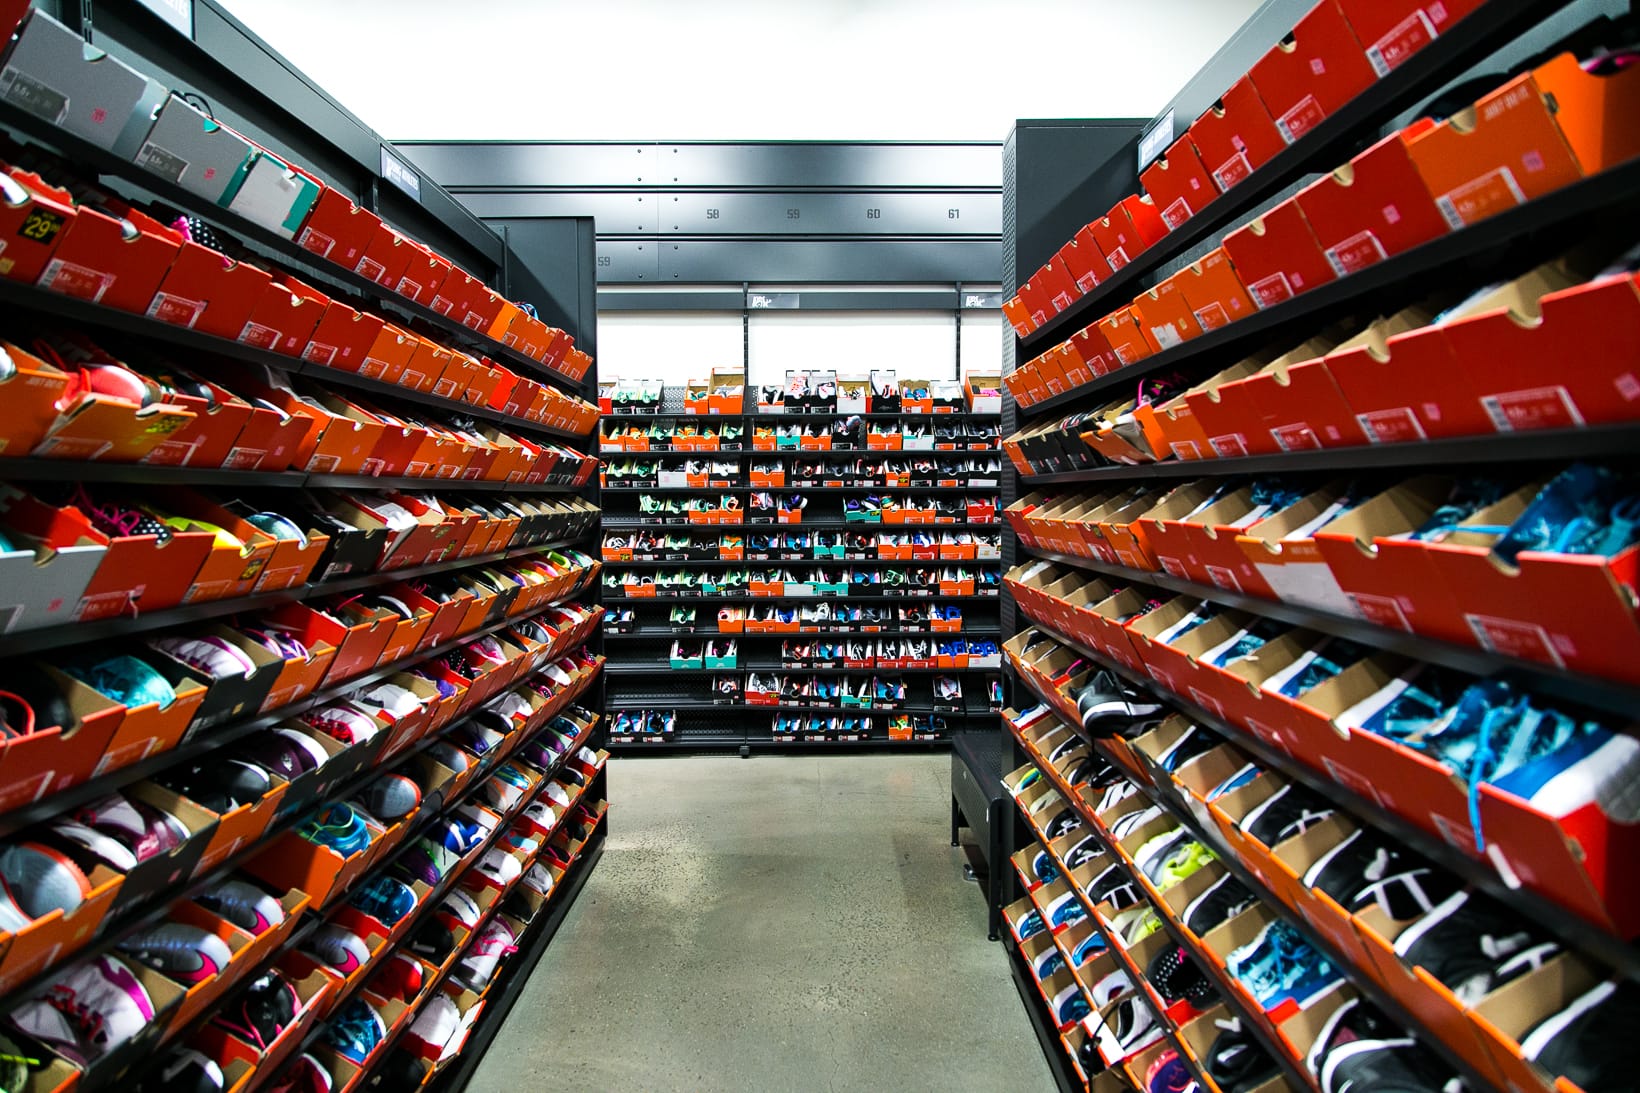 Have All Sneaker Factory Outlets Lost 